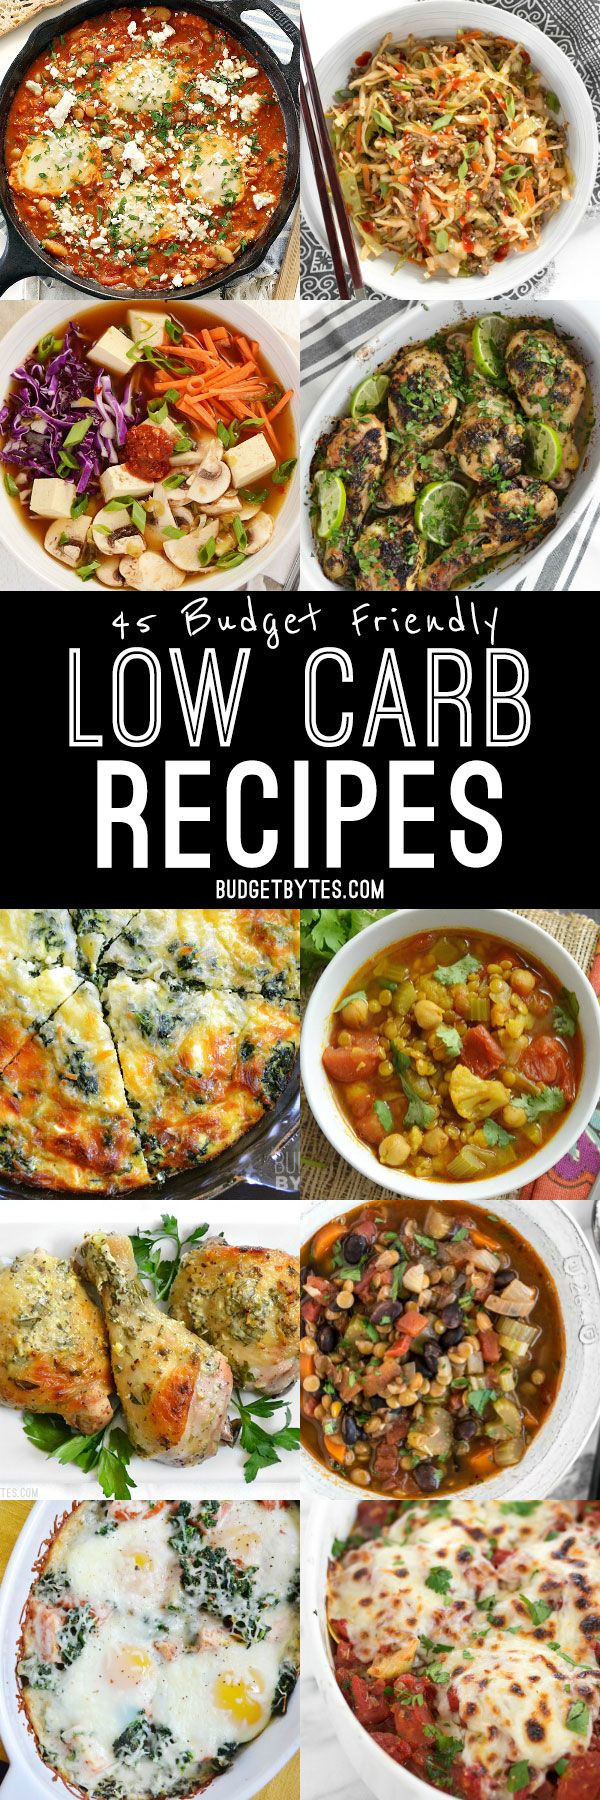 Cheap Low Carb Dinners
 Best 25 Bud recipes ideas on Pinterest